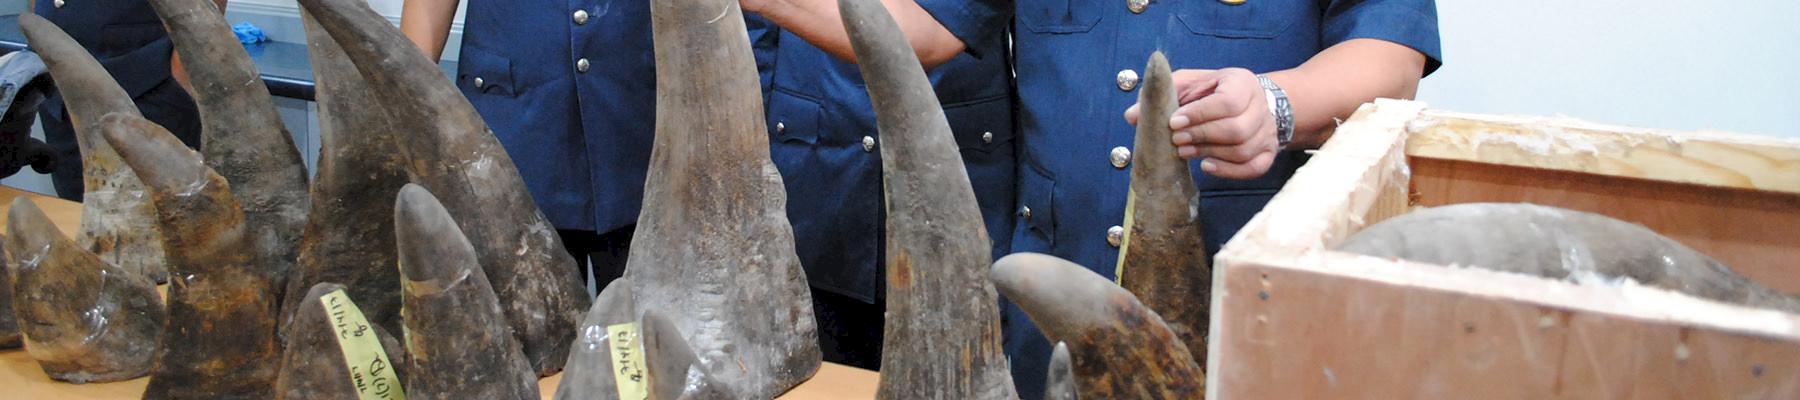 18 rhino horns were seized by Malaysian Customs after the shipment was falsely declared as a 'Work of art' at Kuala Lumpur Airport © TRAFFIC